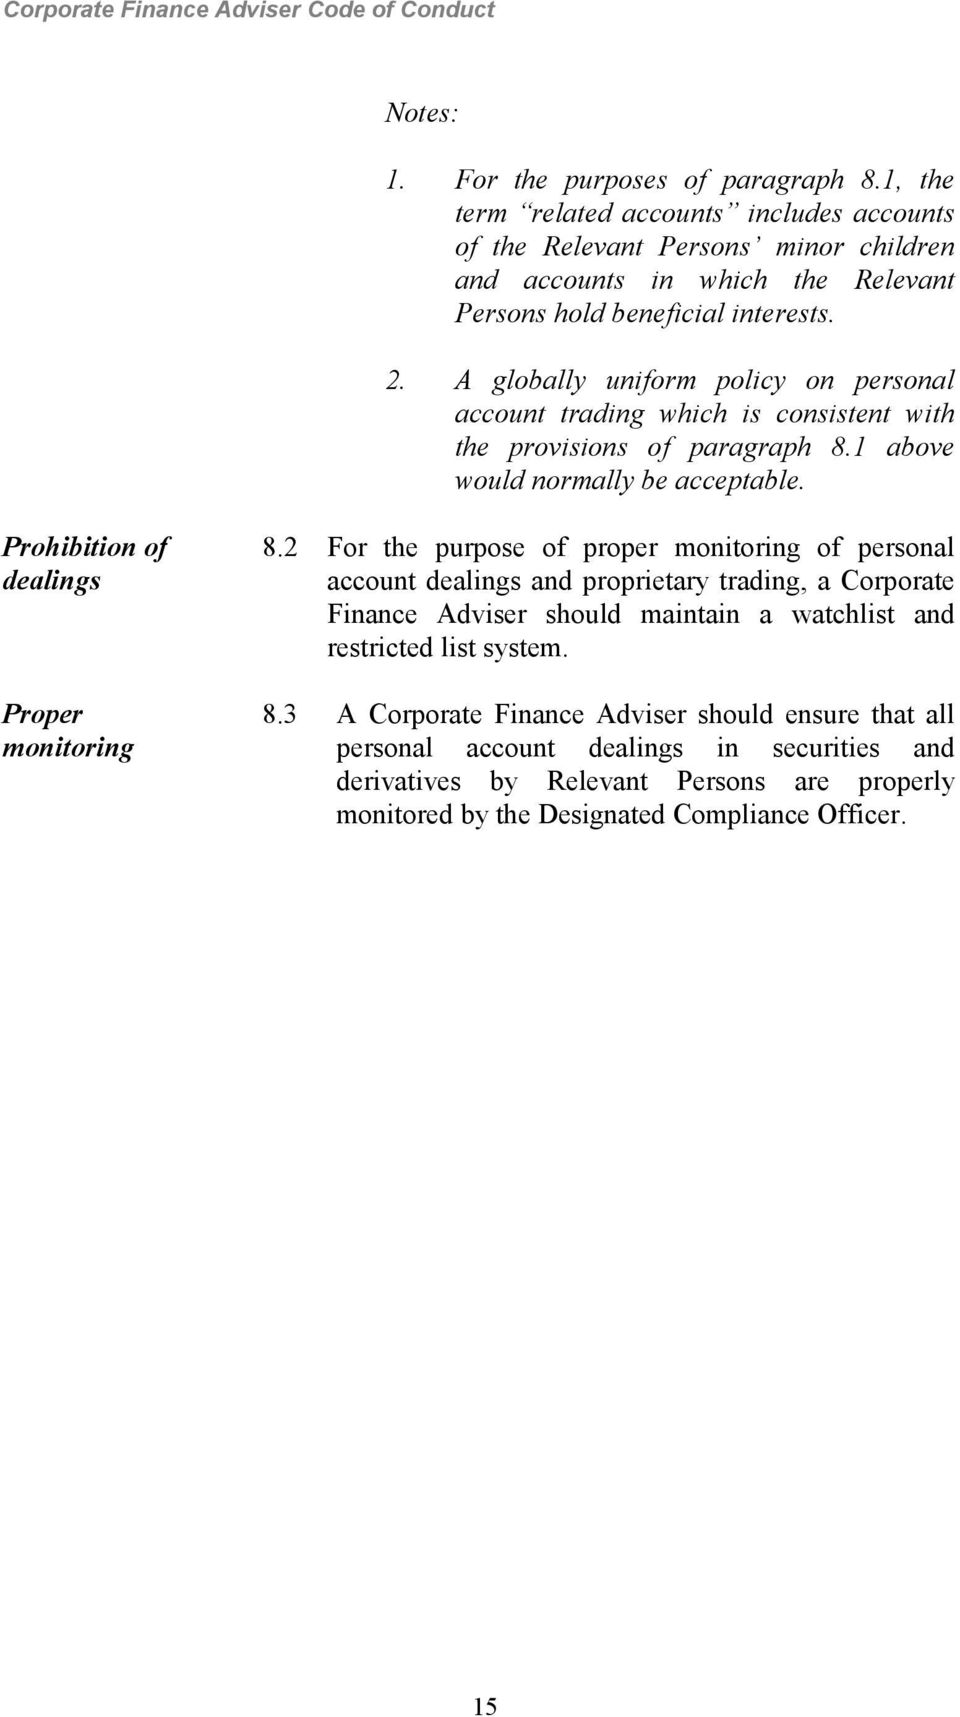 A globally uniform policy on personal account trading which is consistent with the provisions of paragraph 8.1 above would normally be acceptable. Prohibition of dealings Proper monitoring 8.